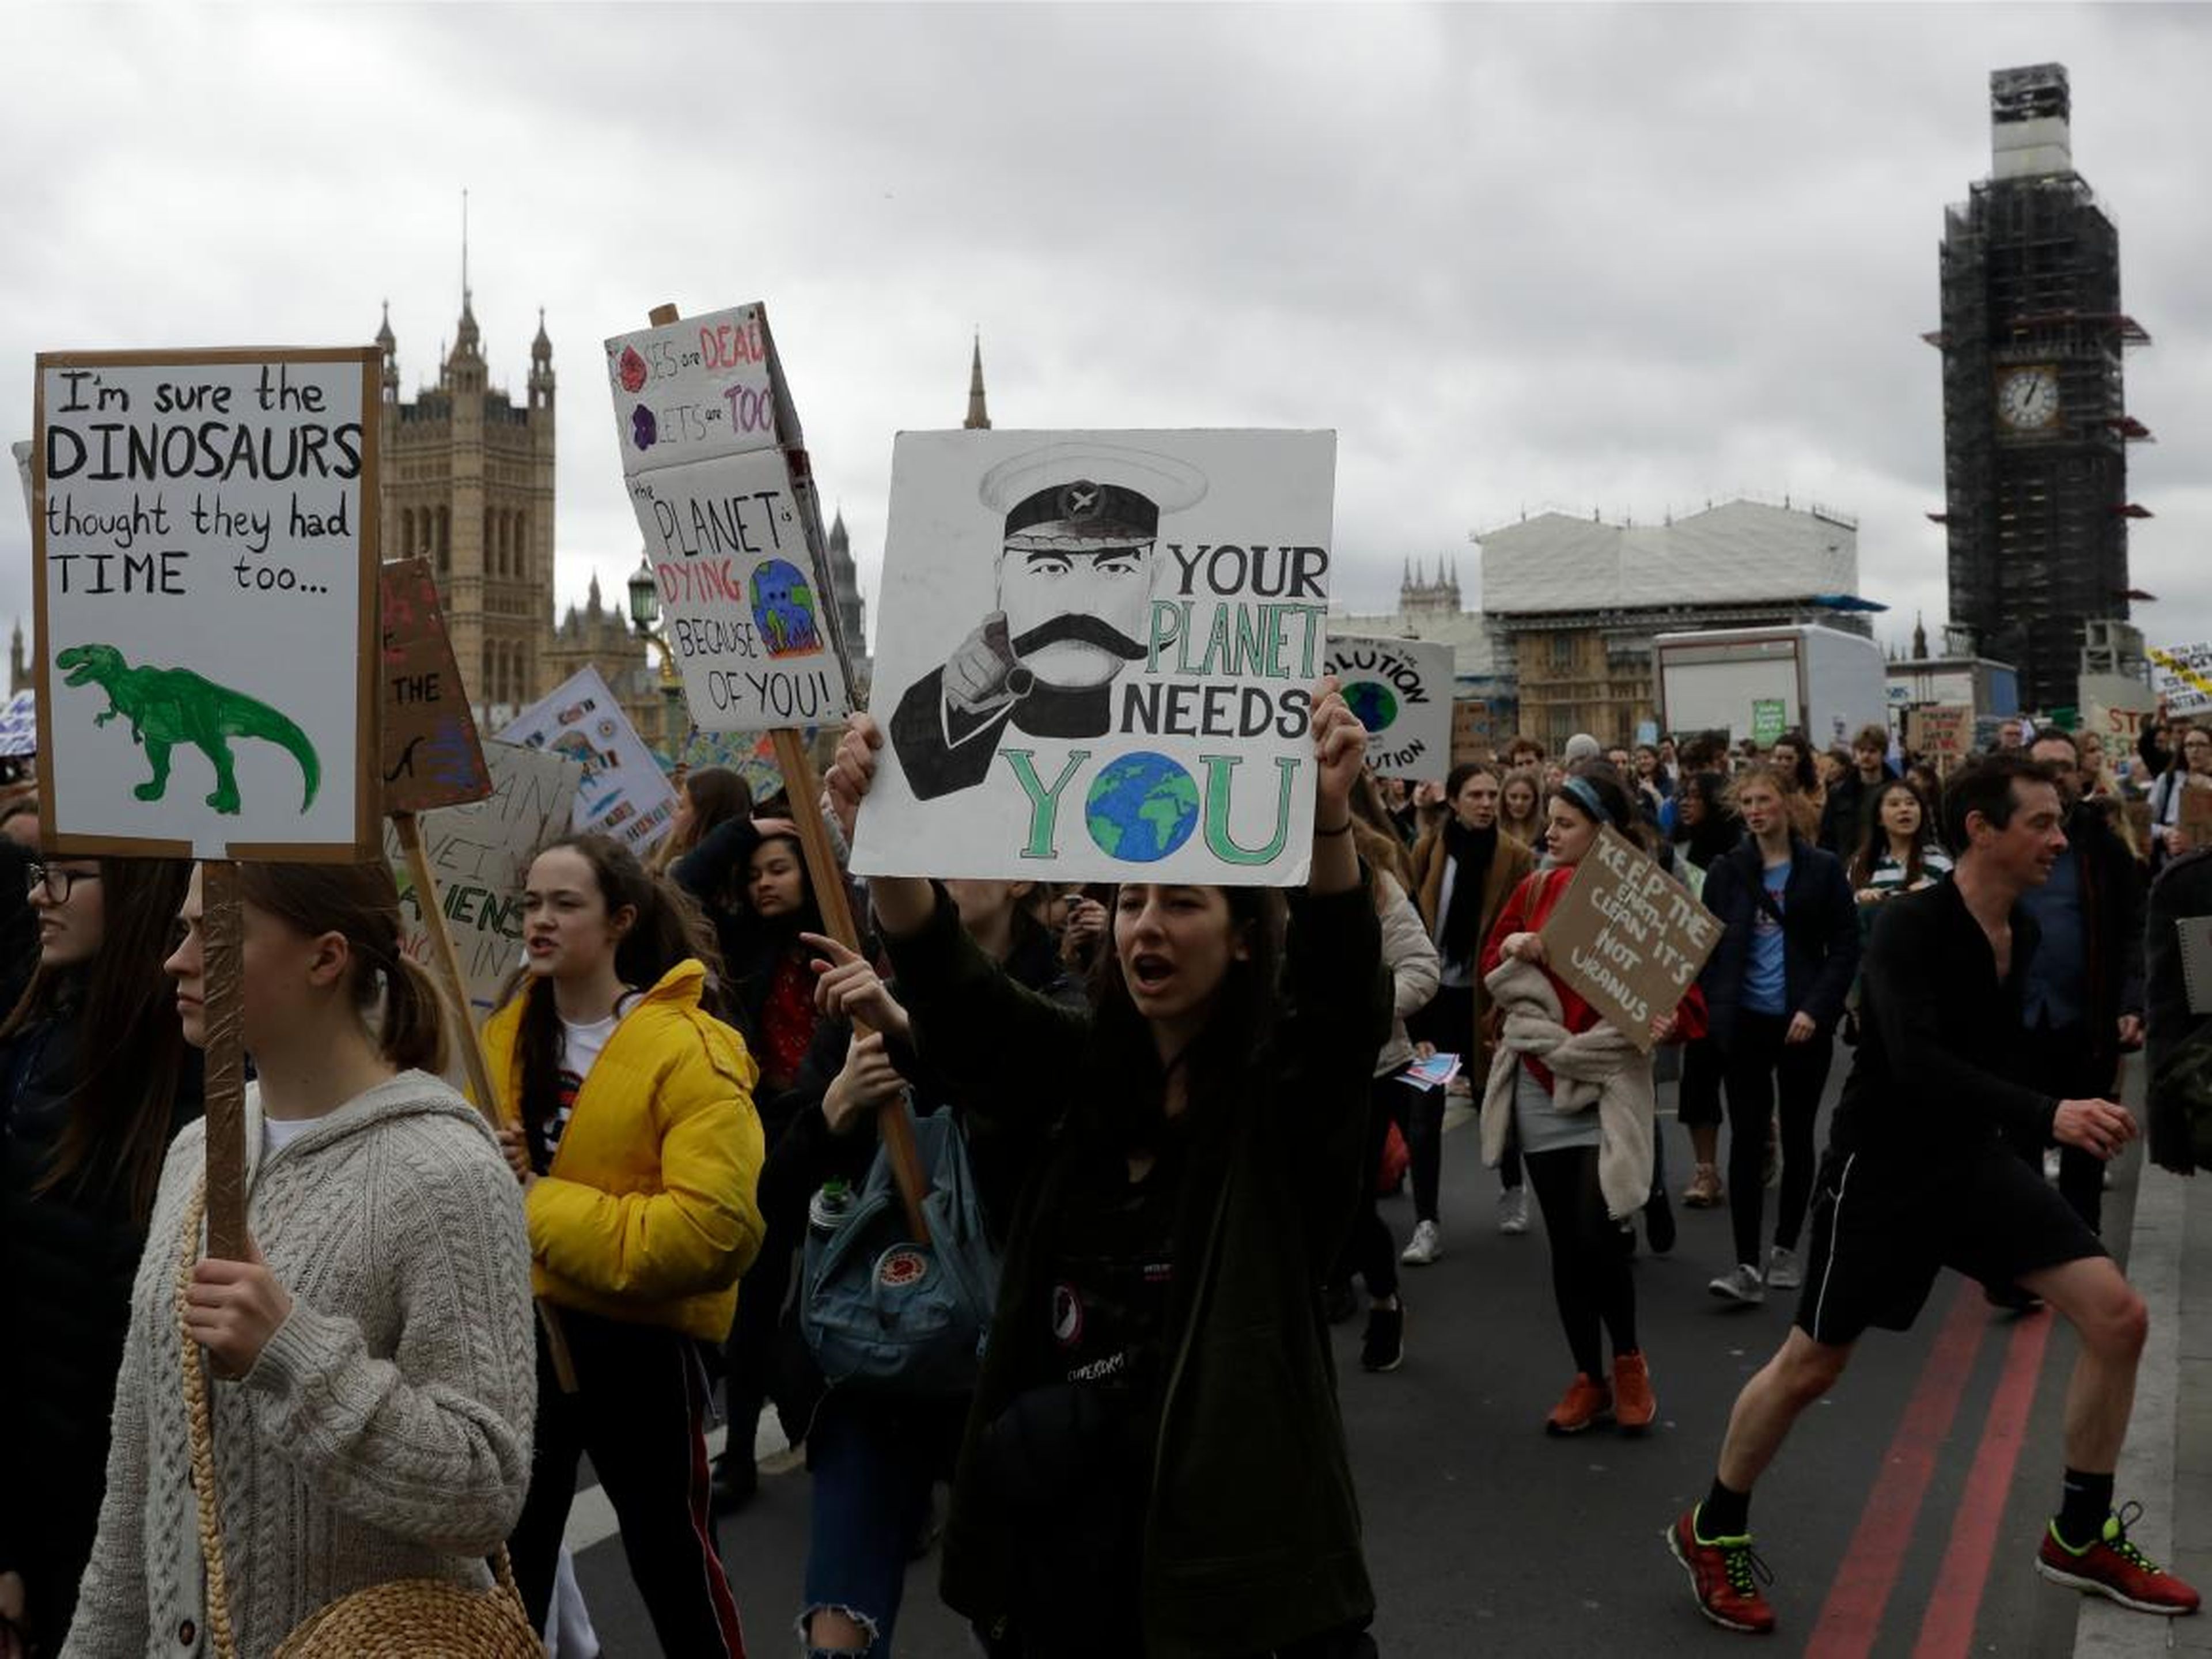 Students march across Westminster Bridge as they take part in a climate protest in London, March 15, 2019.